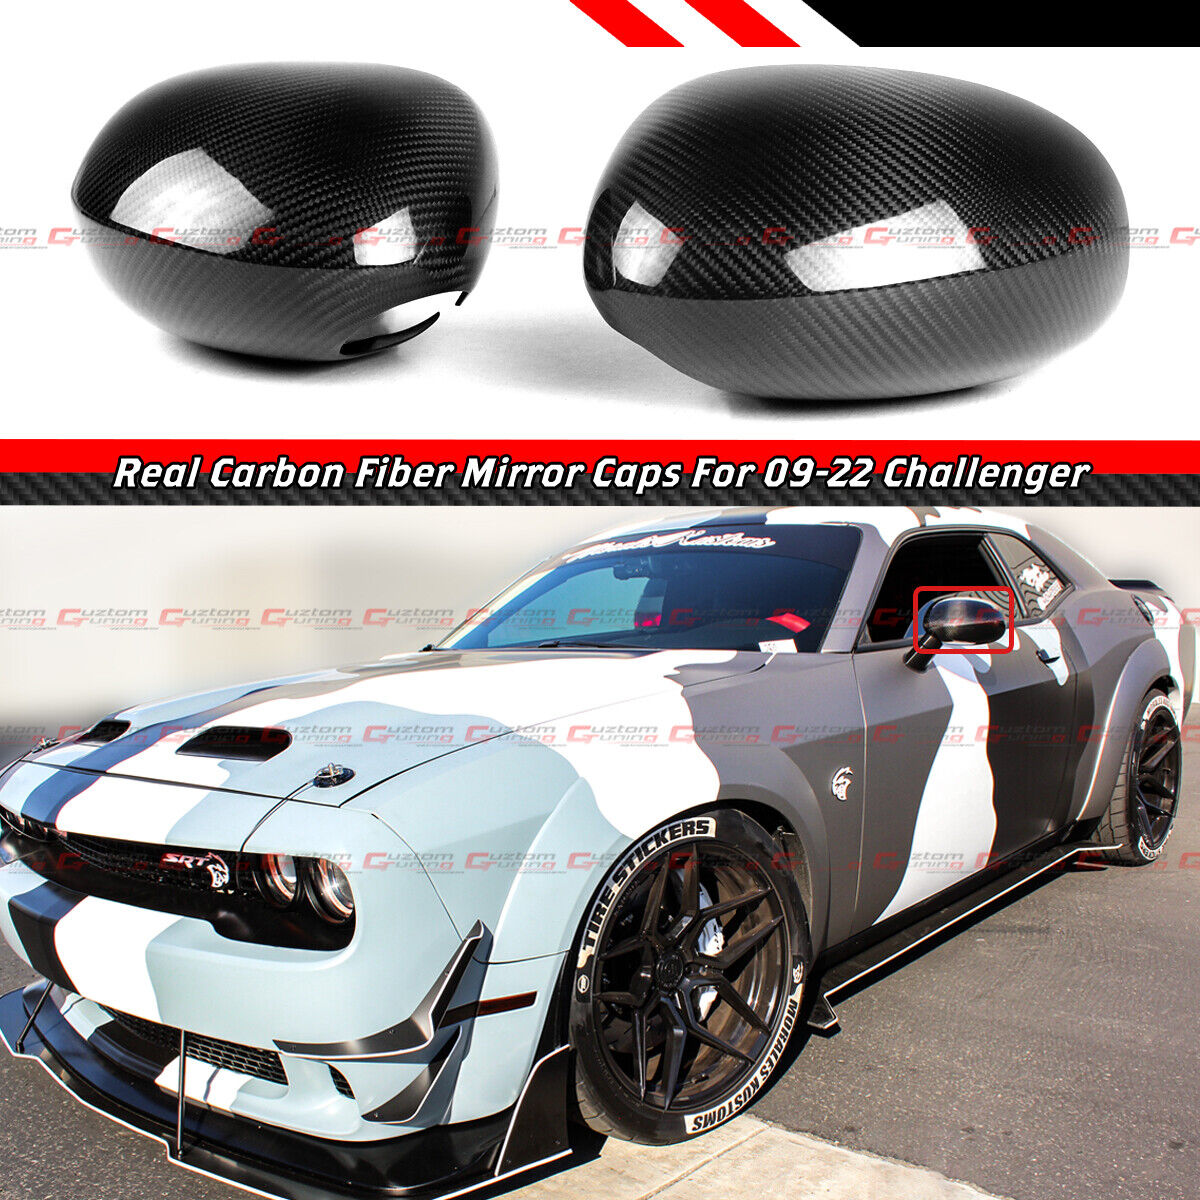 FOR 2009-2022 DODGE CHALLENGER REAL CARBON FIBER SIDE MIRROR COVER CAPS OVERLAY